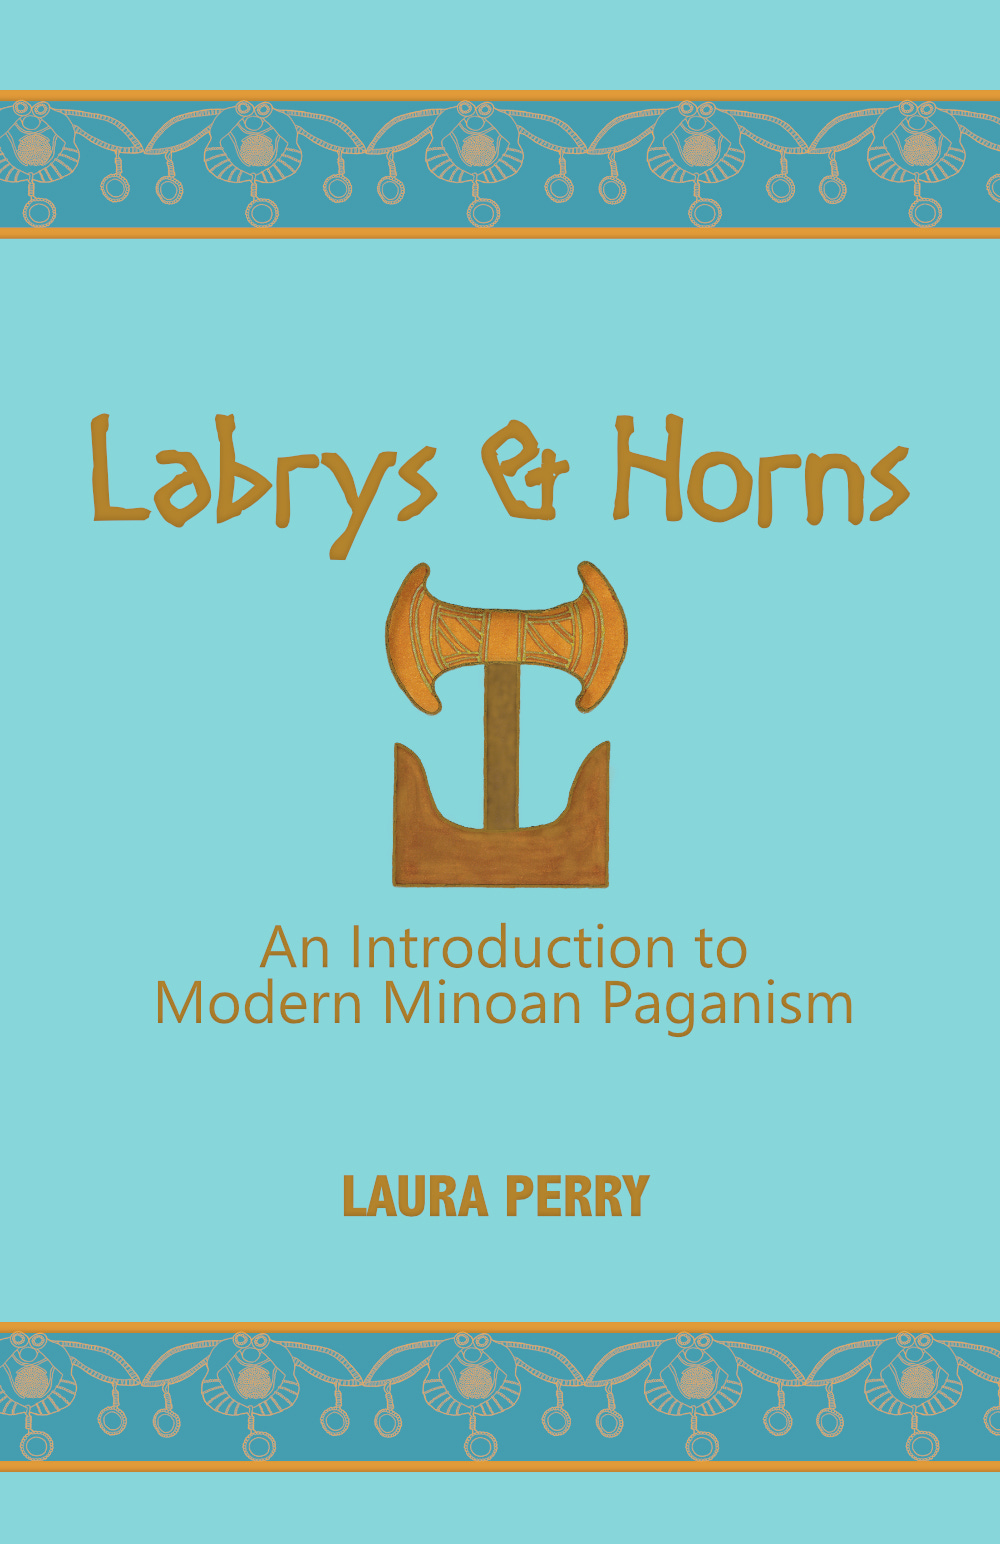 Labrys and Horns: An Introduction to Modern Minoan Paganism by Laura Perry book cover